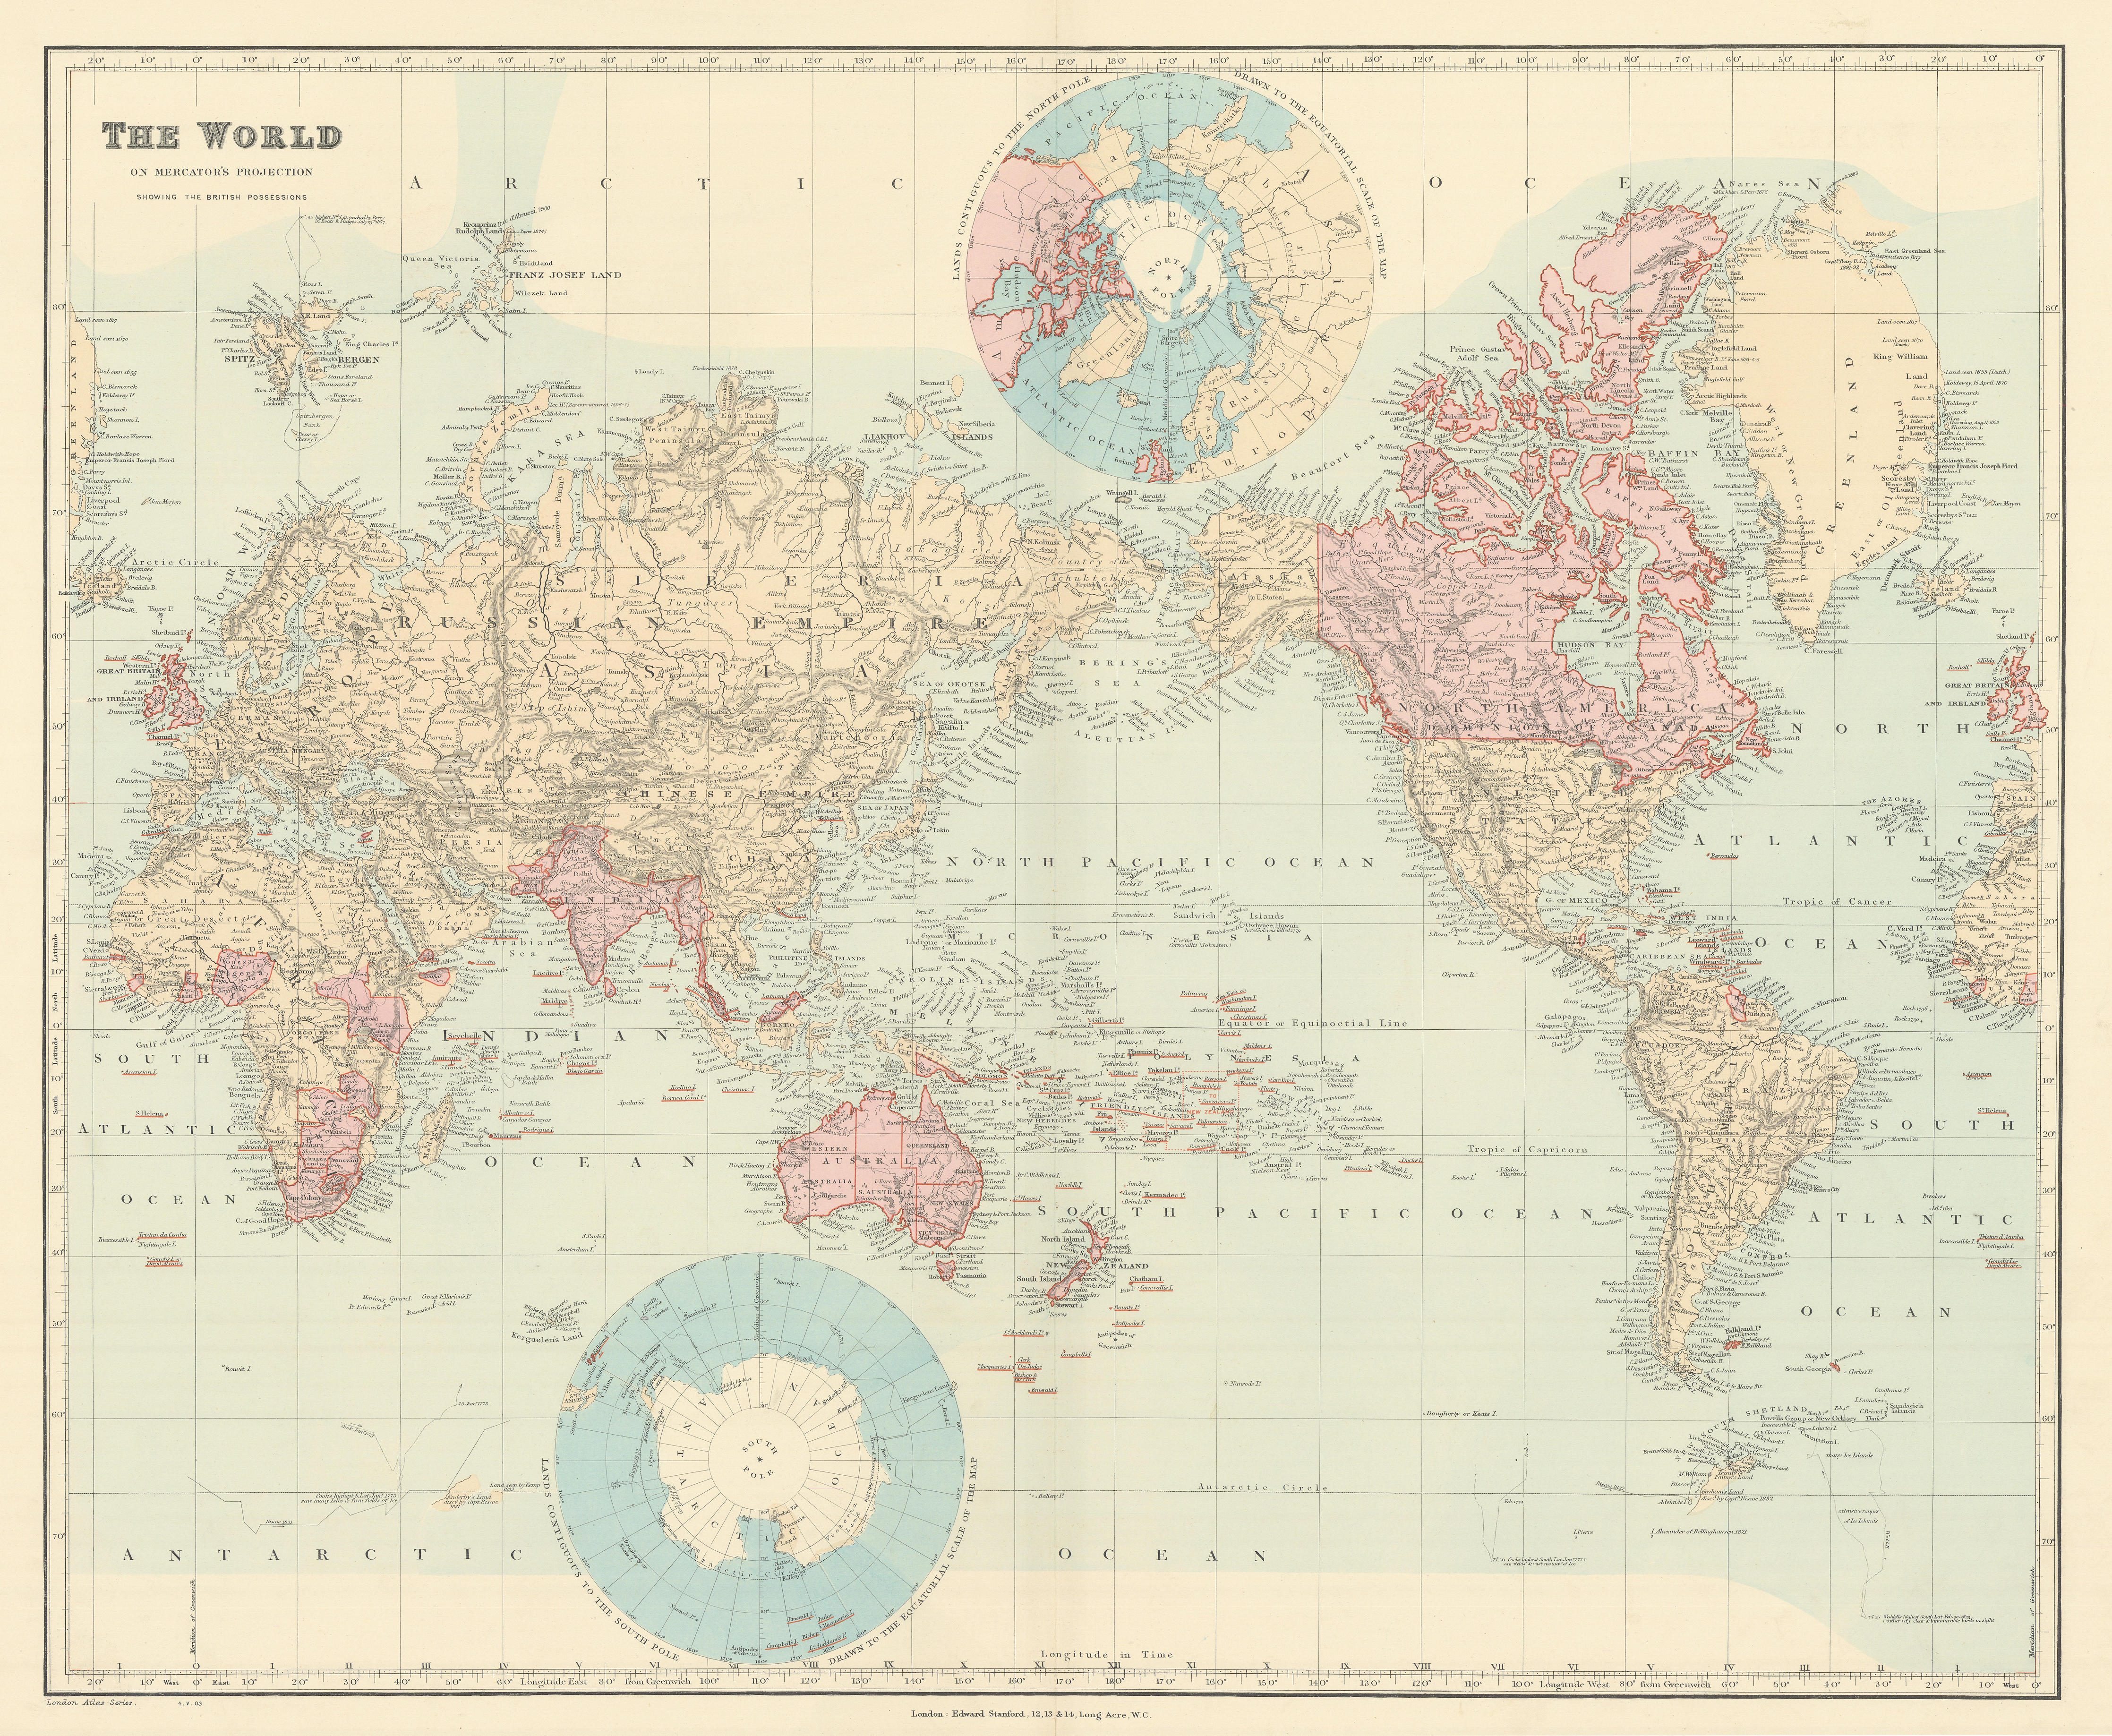 The World showing British Possessions/Empire in pink. 52x63cm. STANFORD 1904 map